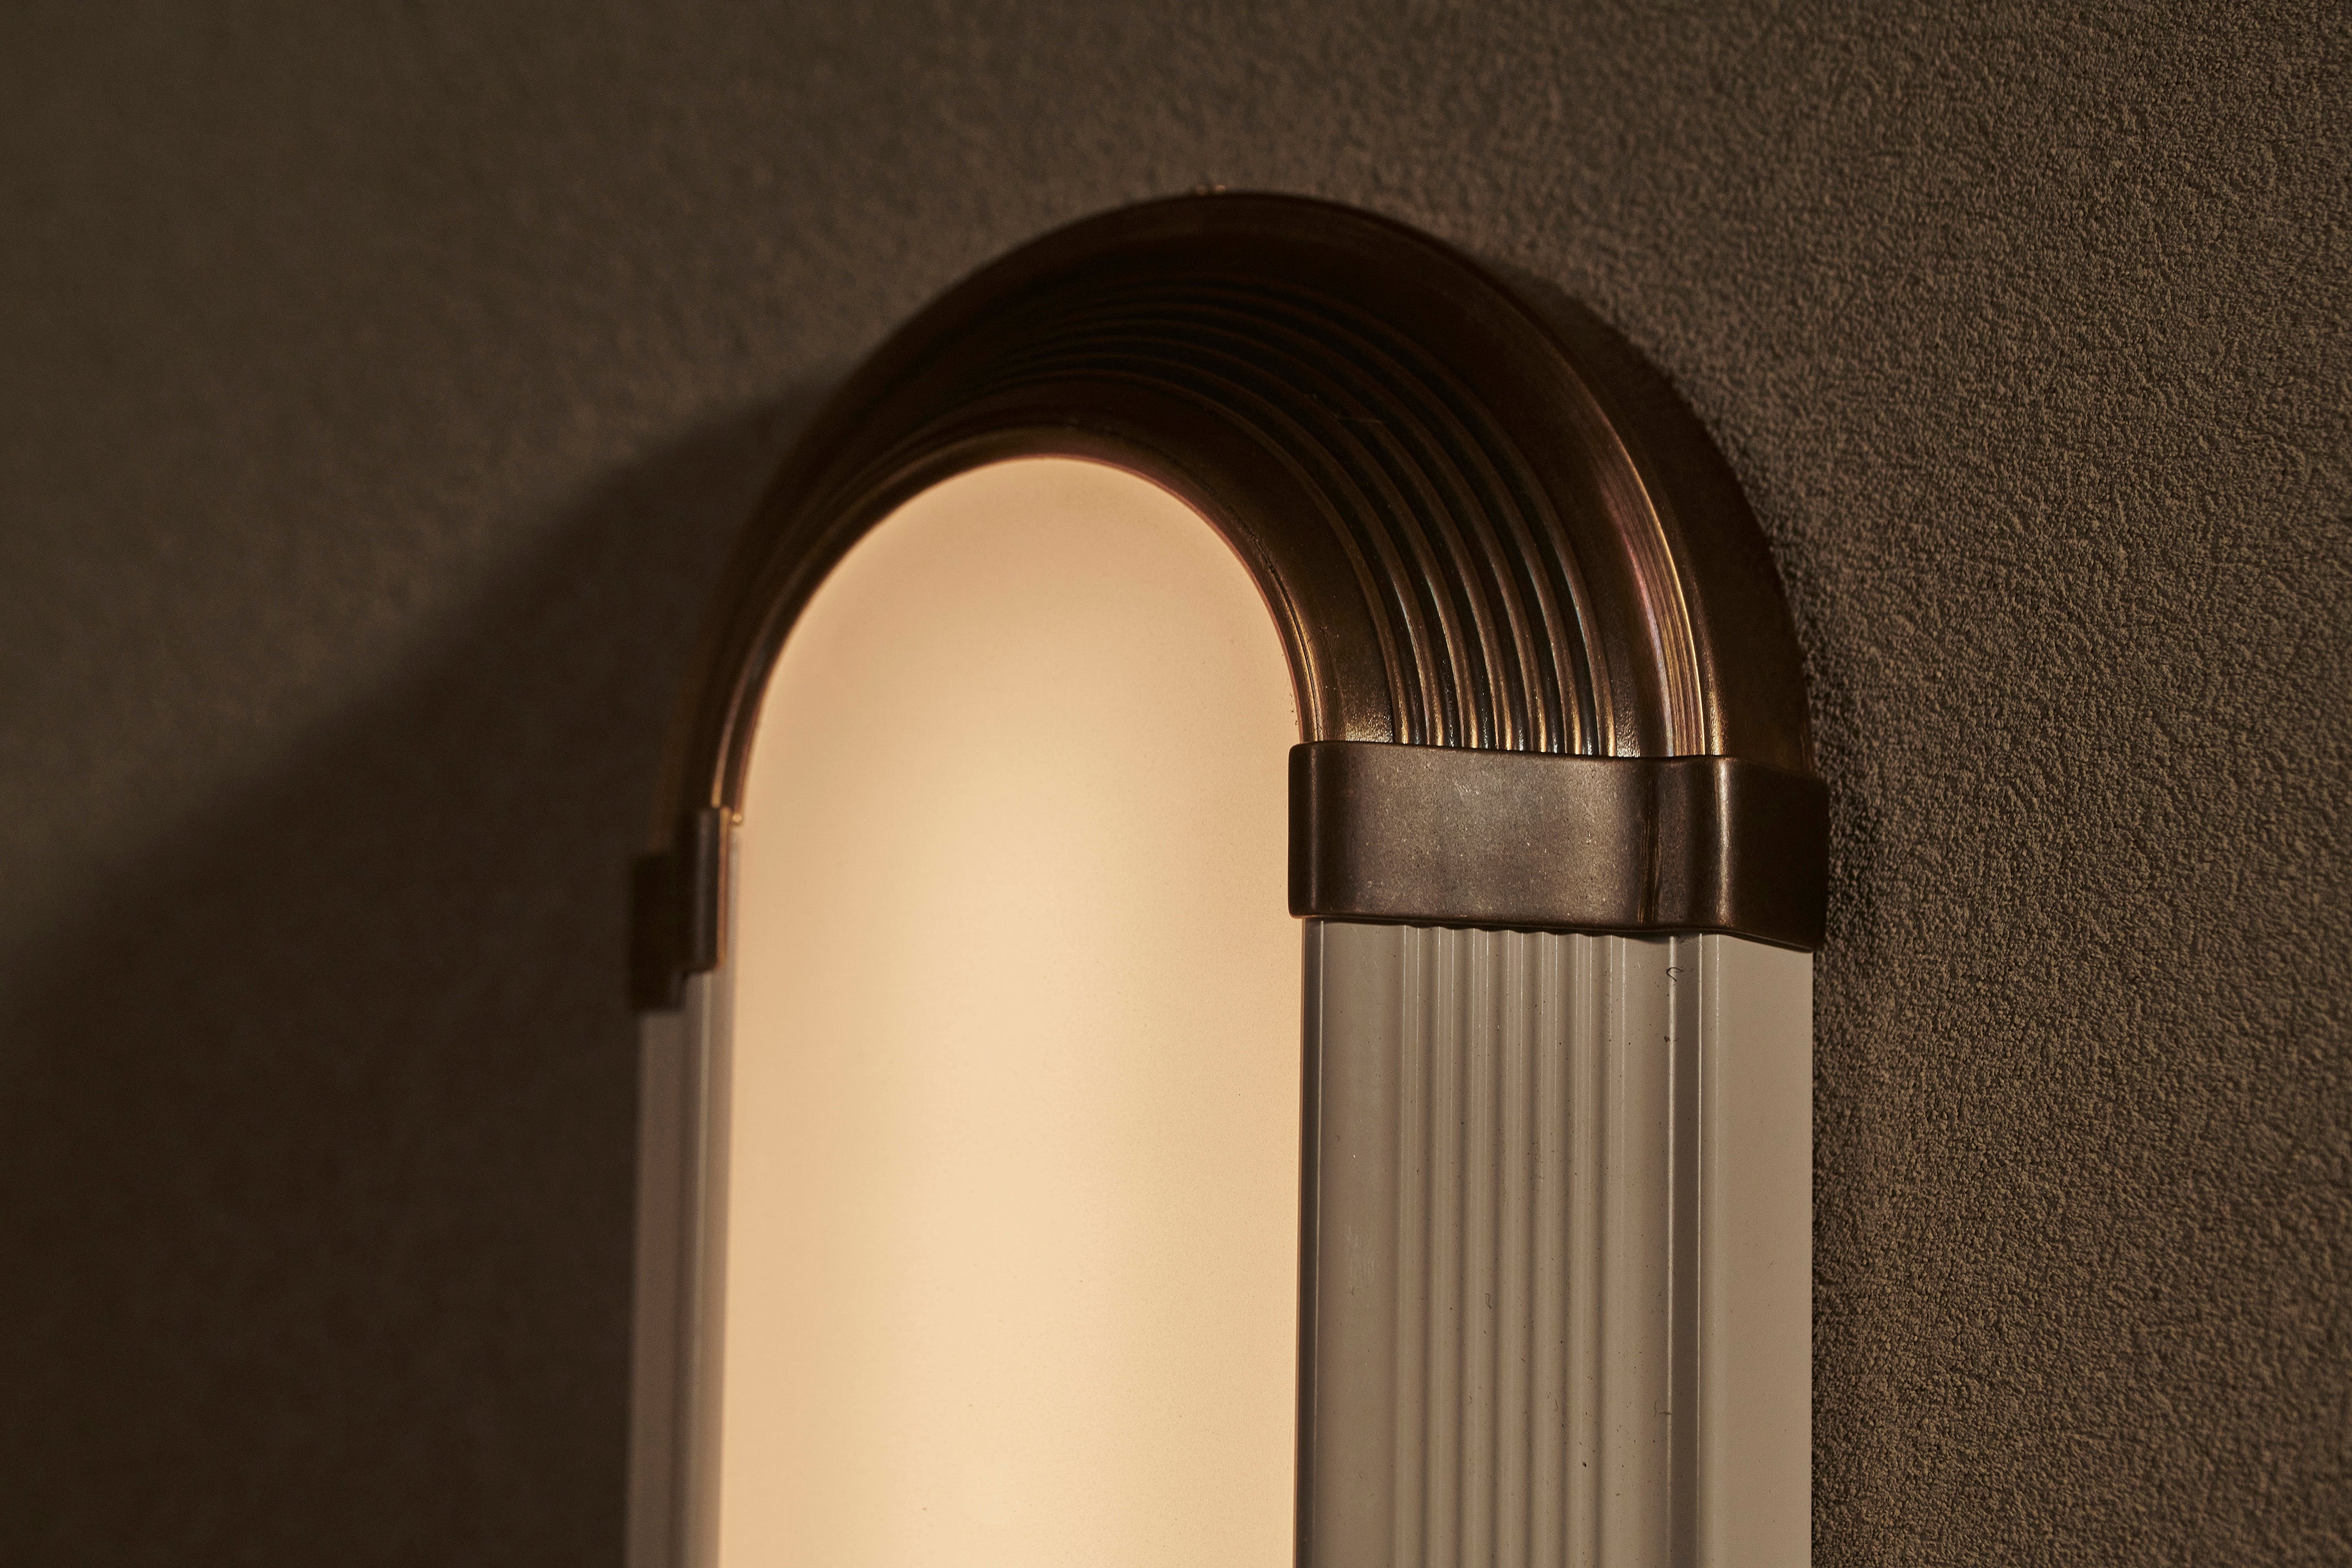 Handcrafted linear wall light by Transmitt. Mid-Century Inspired. Made in Australia.